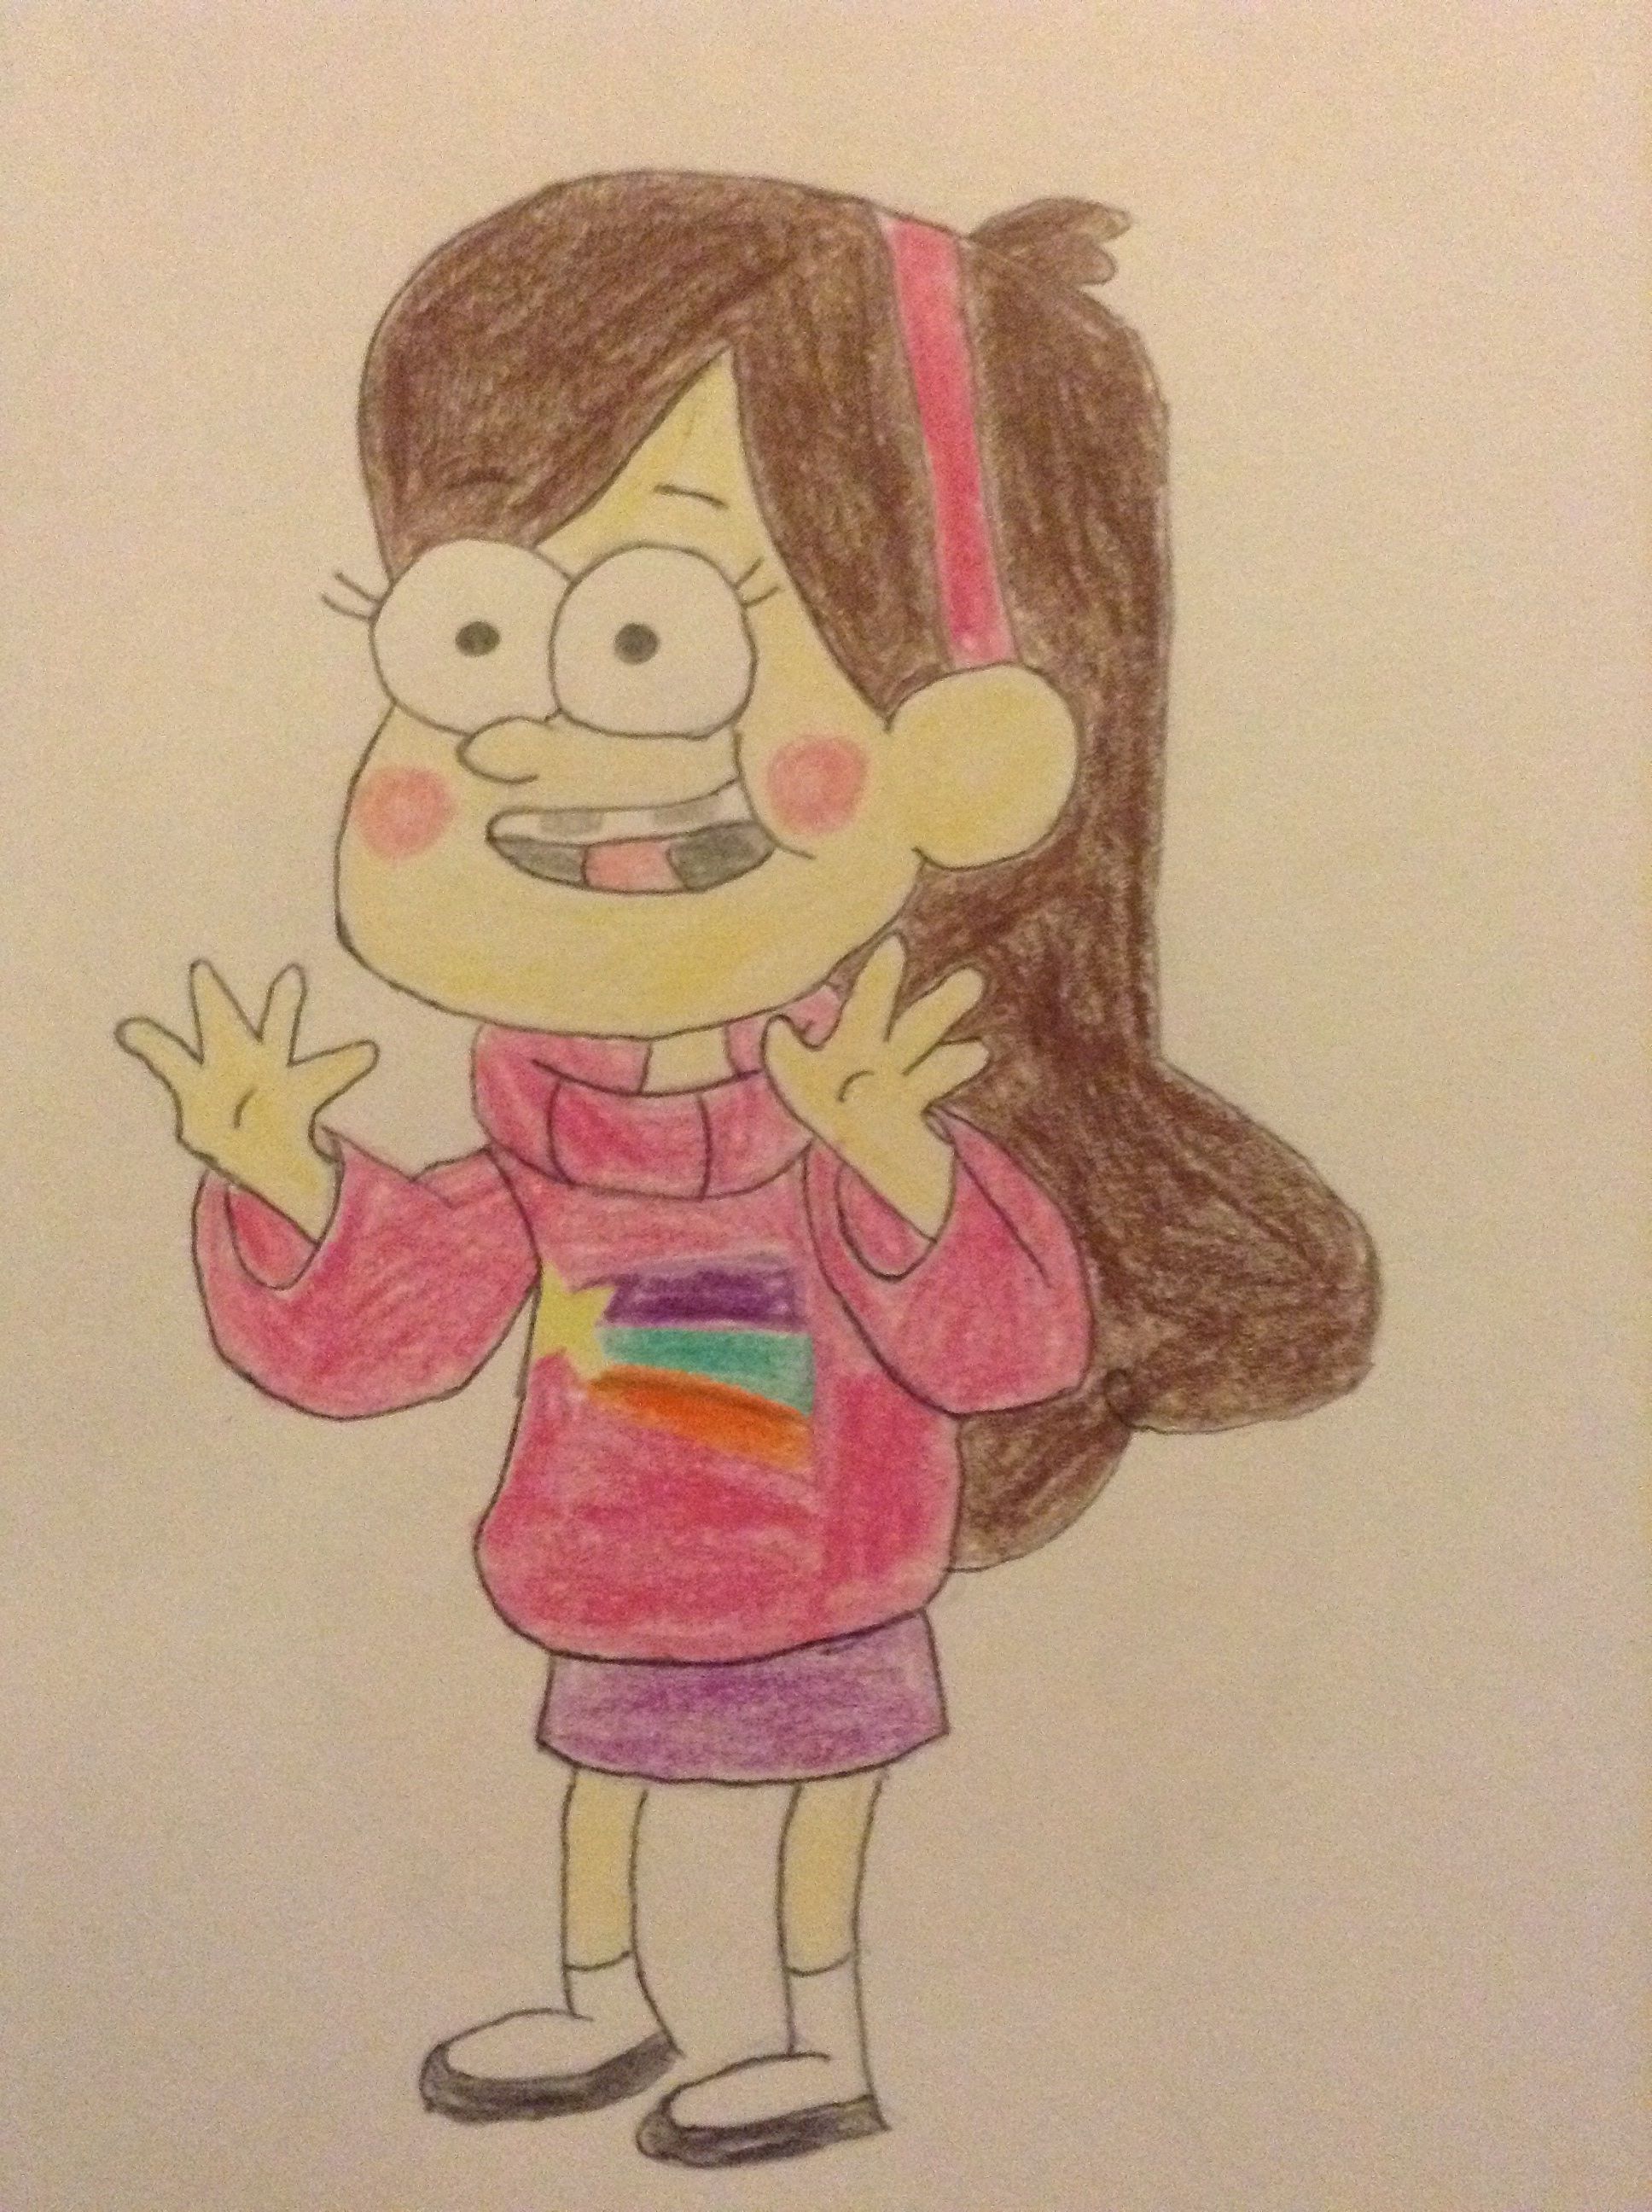 Mable from Gravity Falls